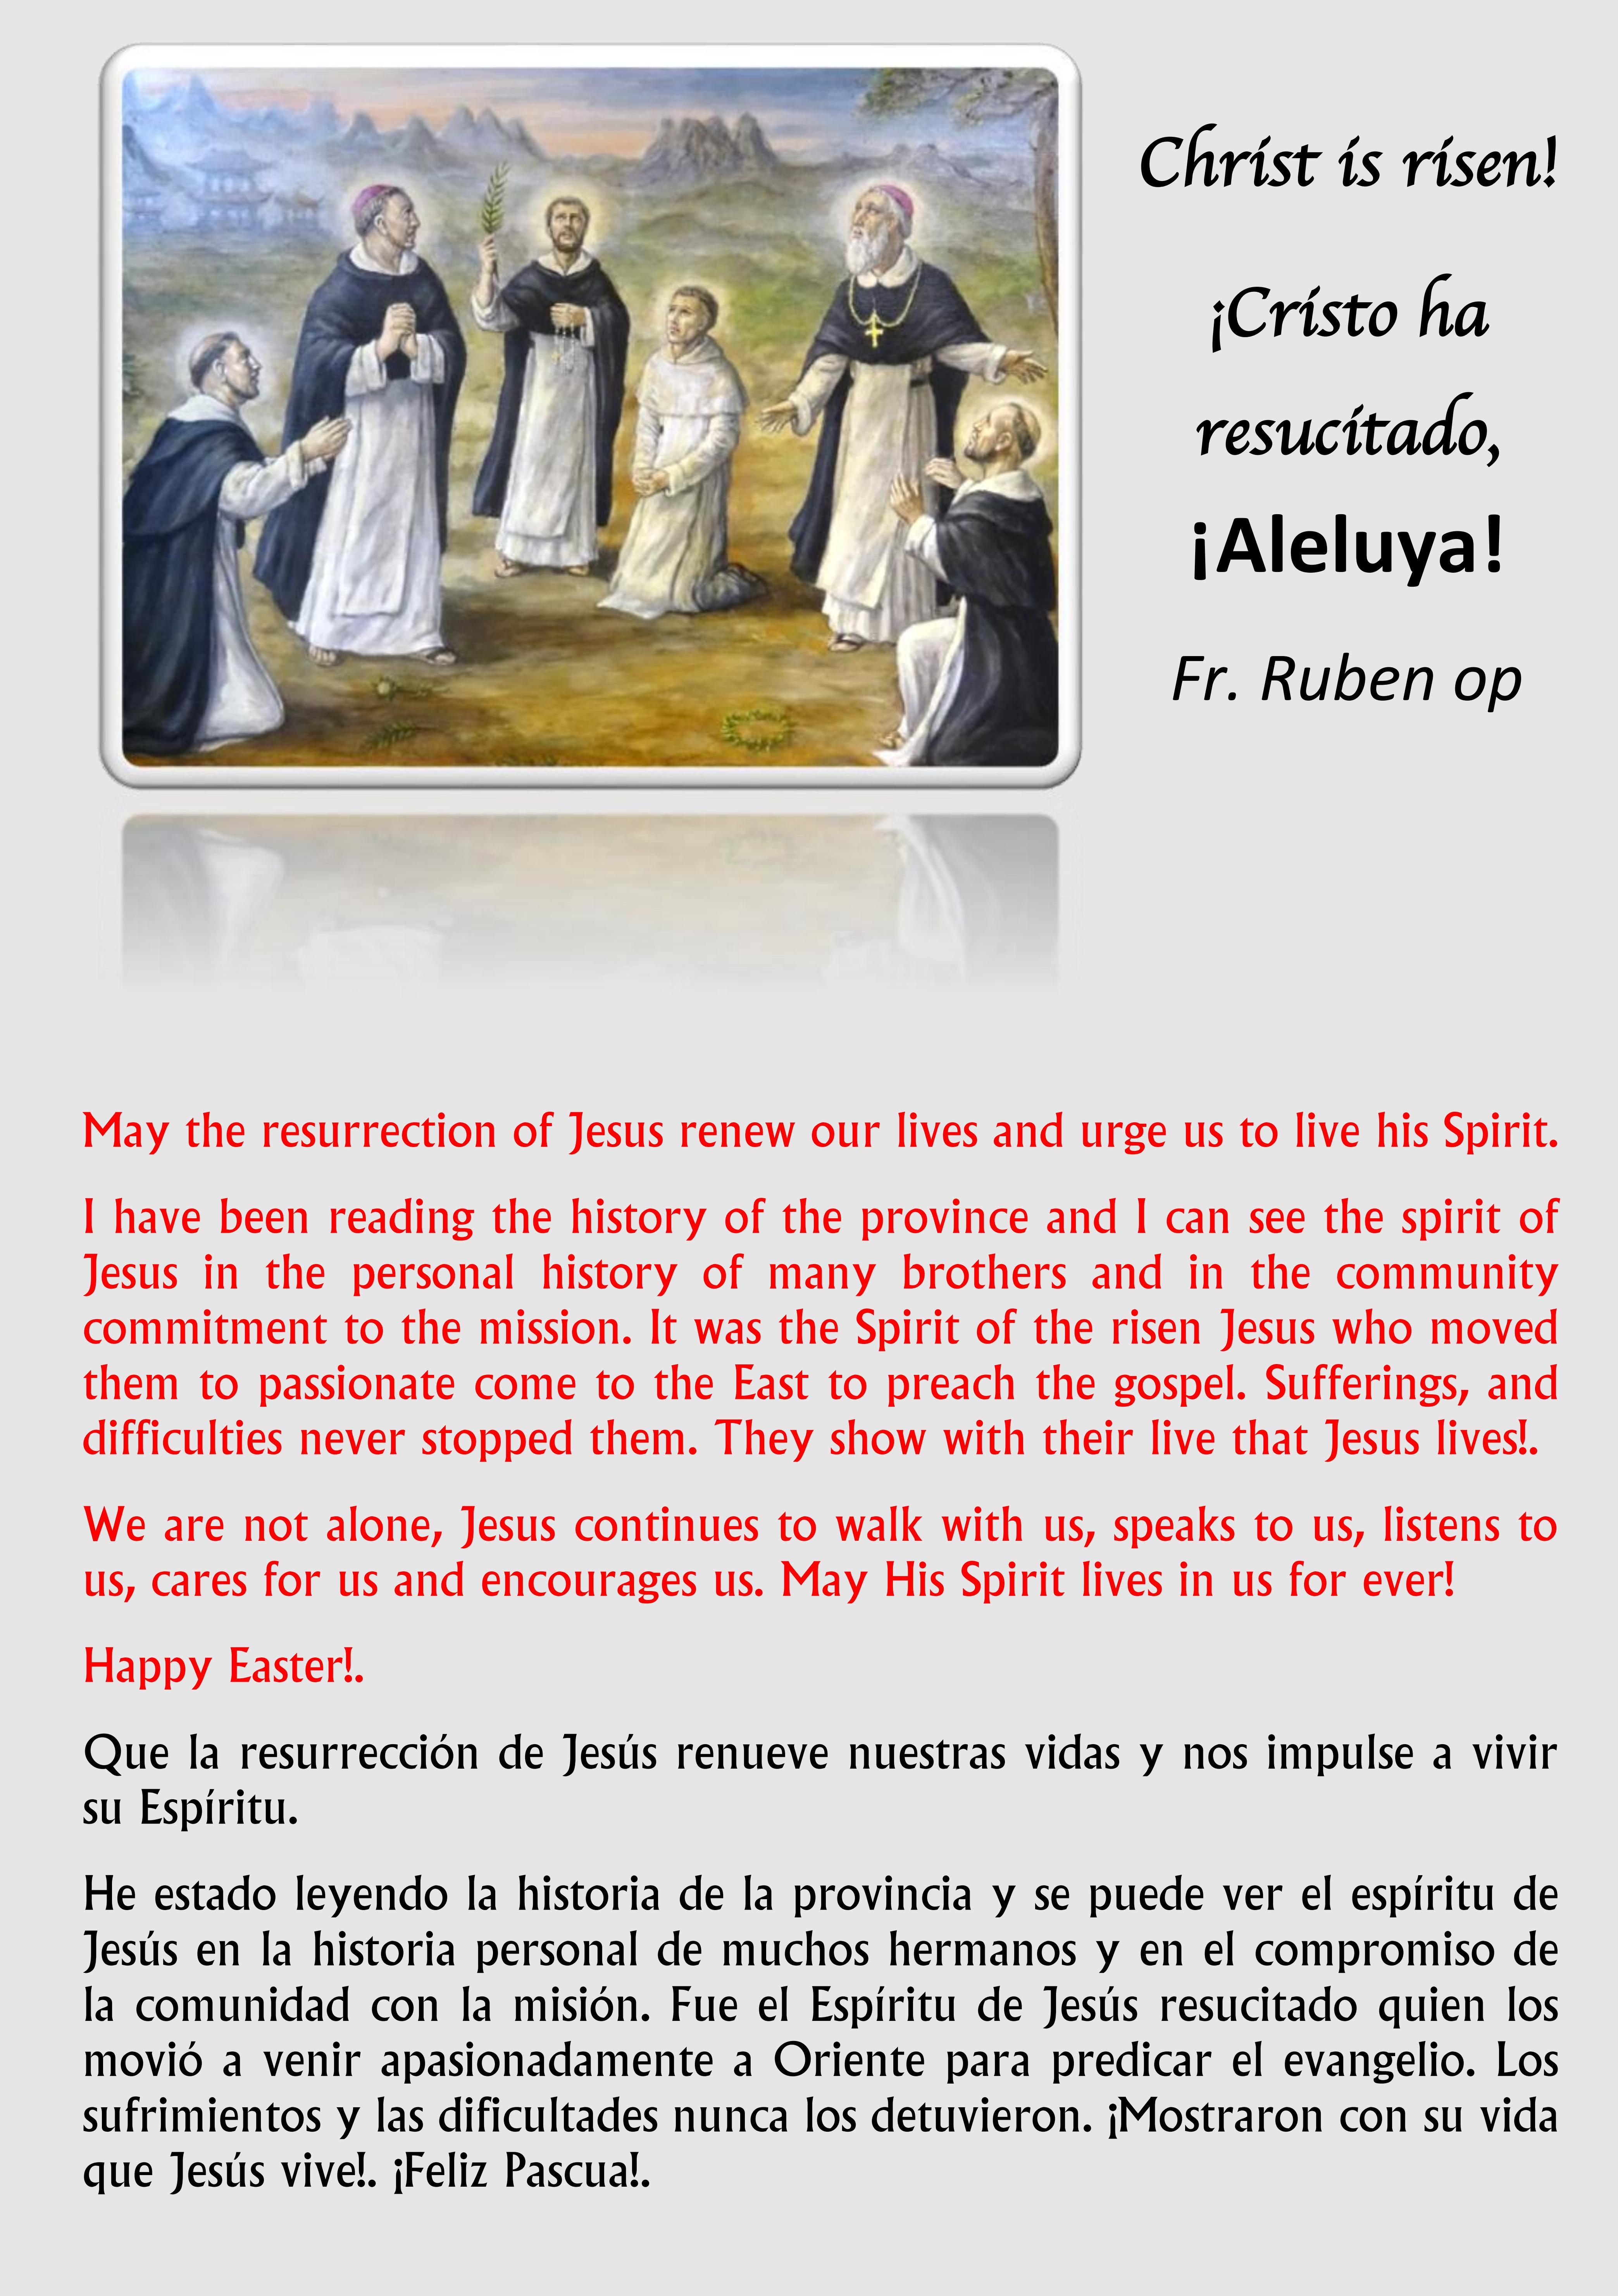  Easter greeting from the Fr. Provincial